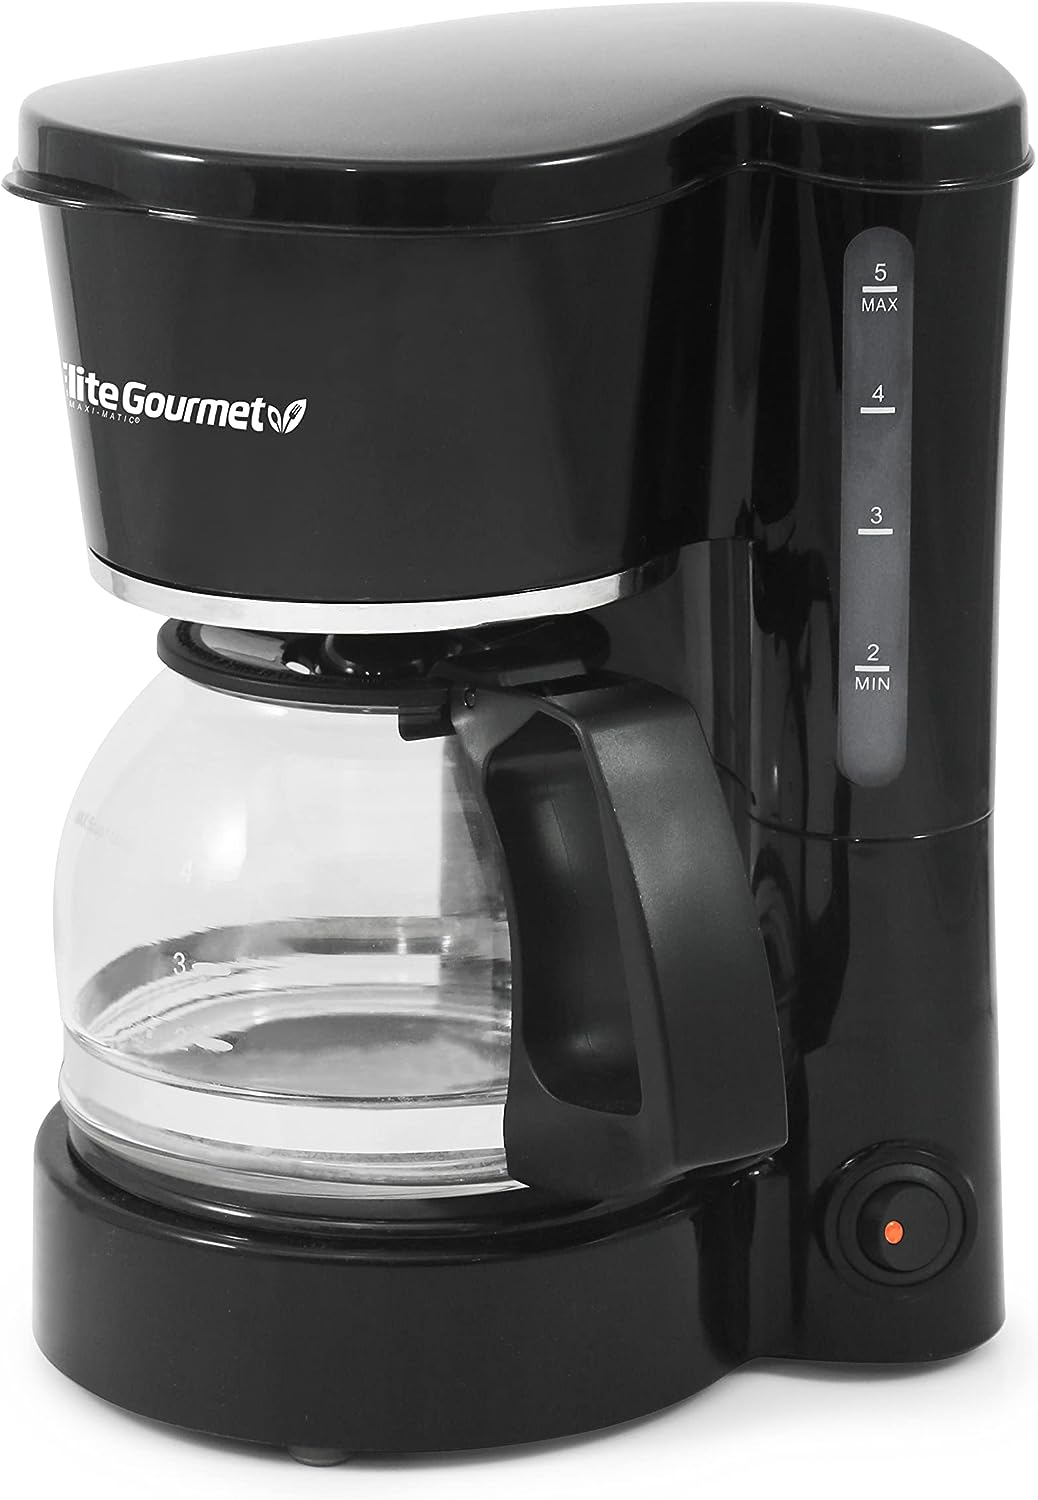 Elite Gourmet EHC-5055# Automatic Brew & Drip Coffee Maker: A Convenient and Efficient Way to Brew Your Coffee